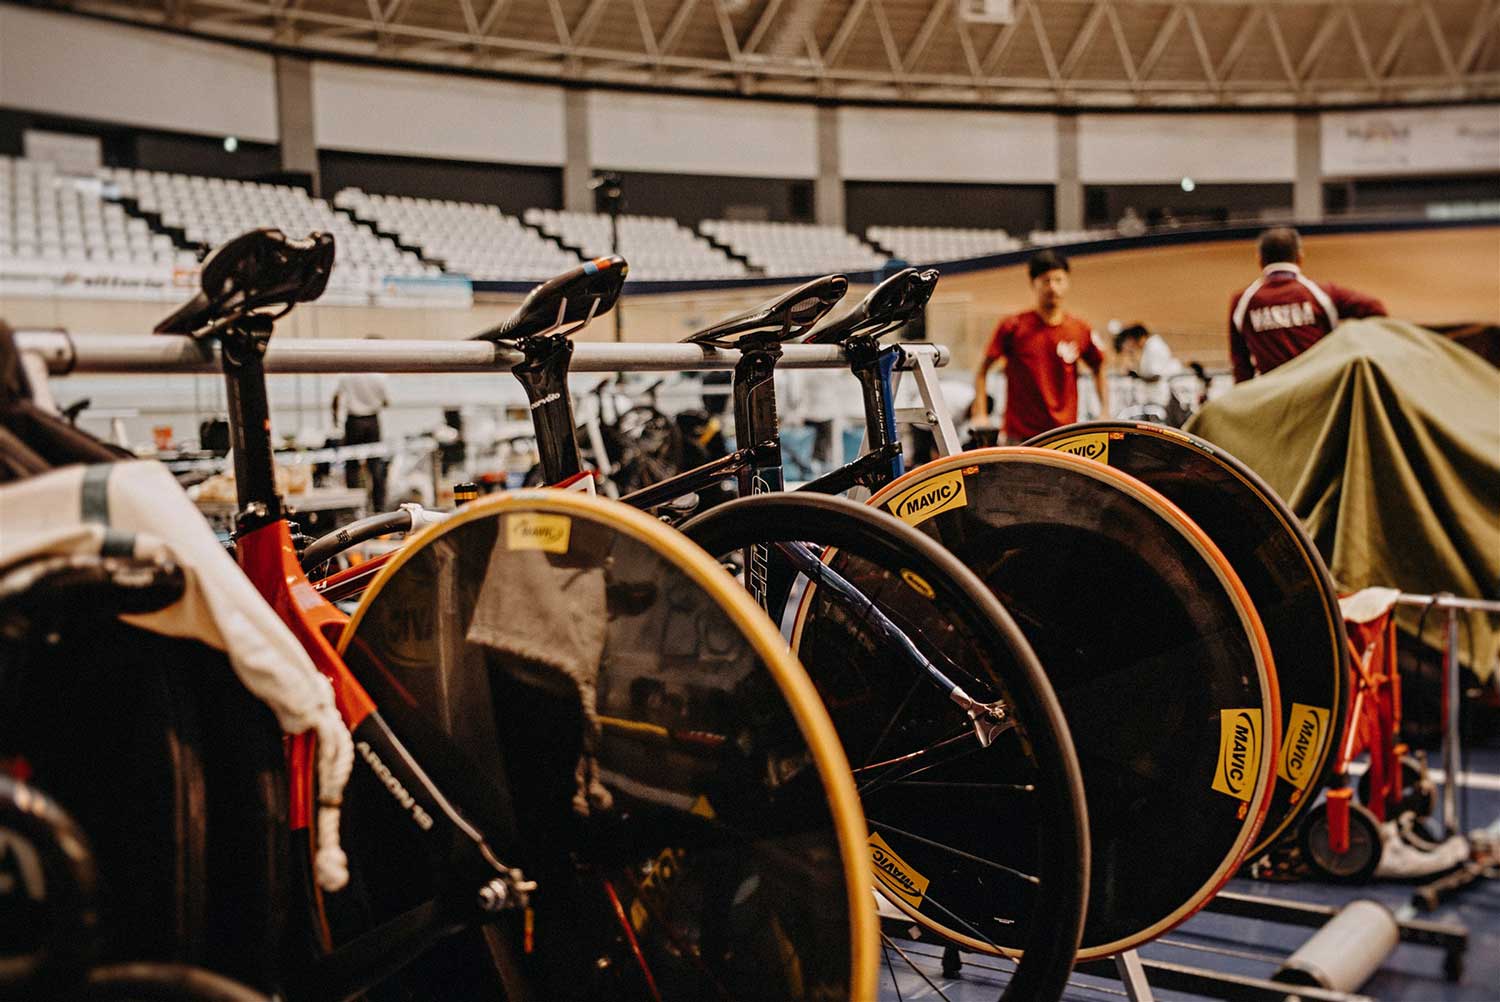 Track cycling bikes all lined uo ready for the National Keirin Championships at Izu Velodrome, Japan